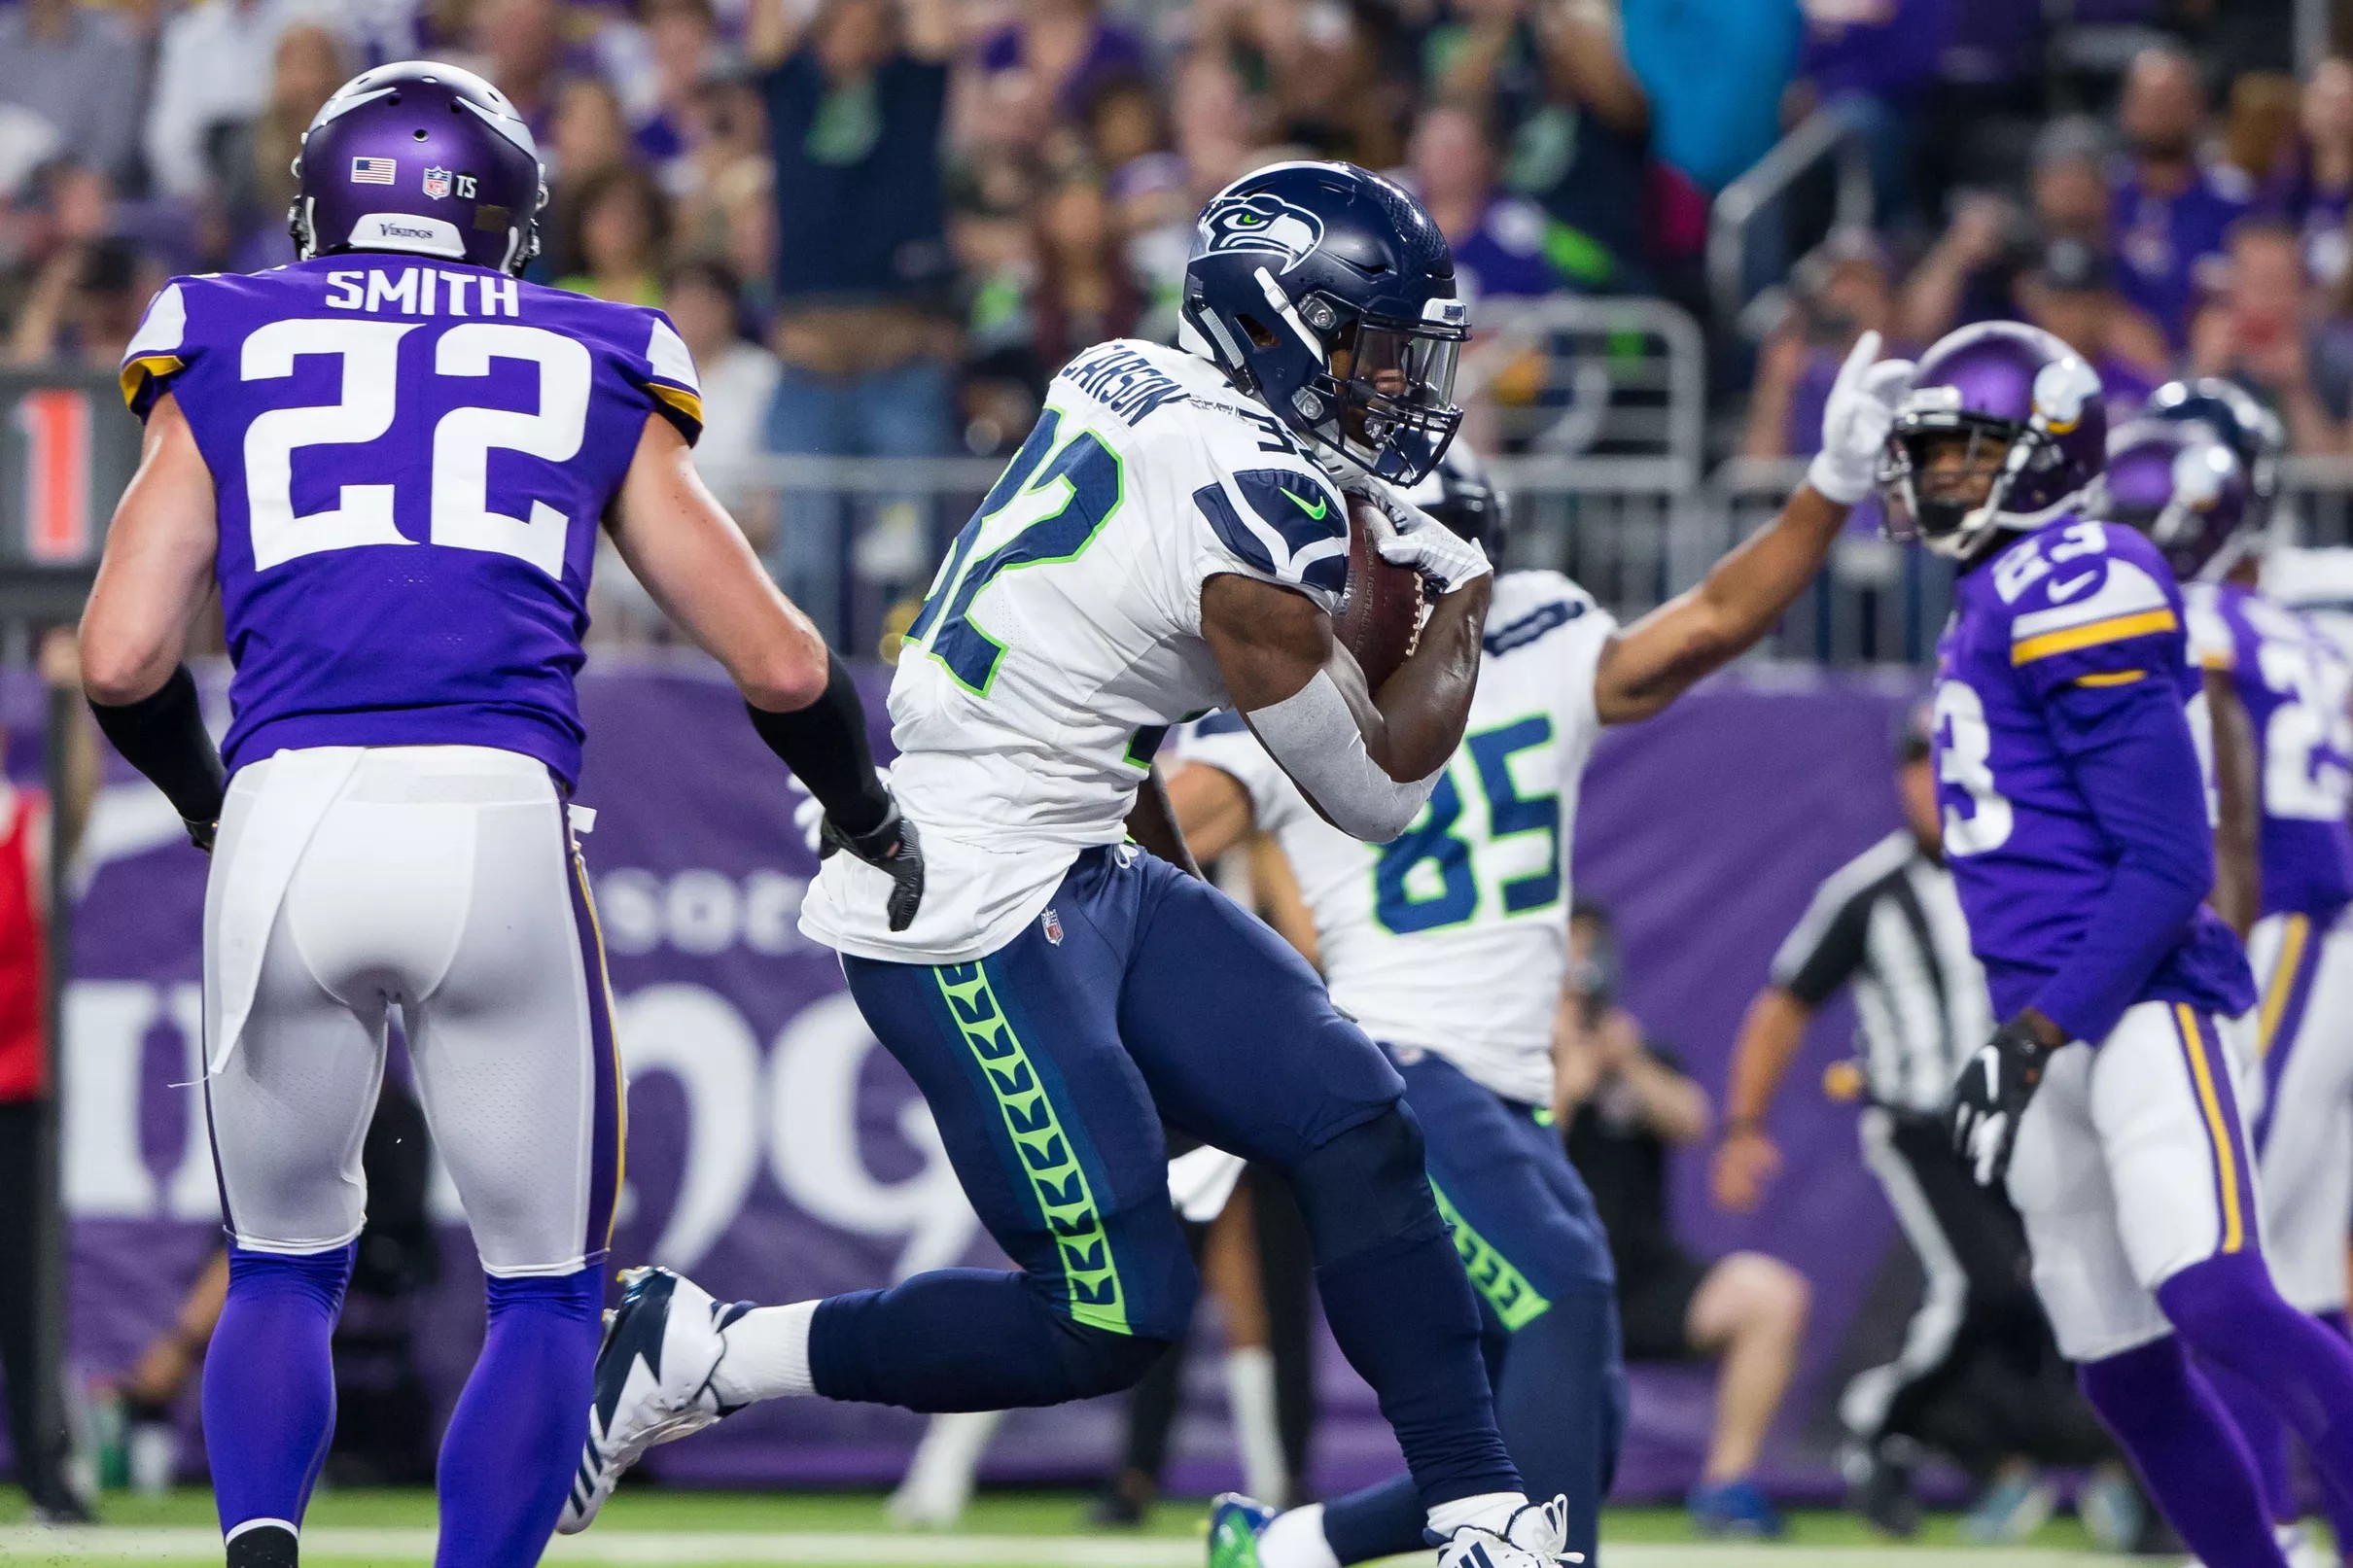 Vikings 21 Seahawks 20 What we learned in Seattle’s third game of the